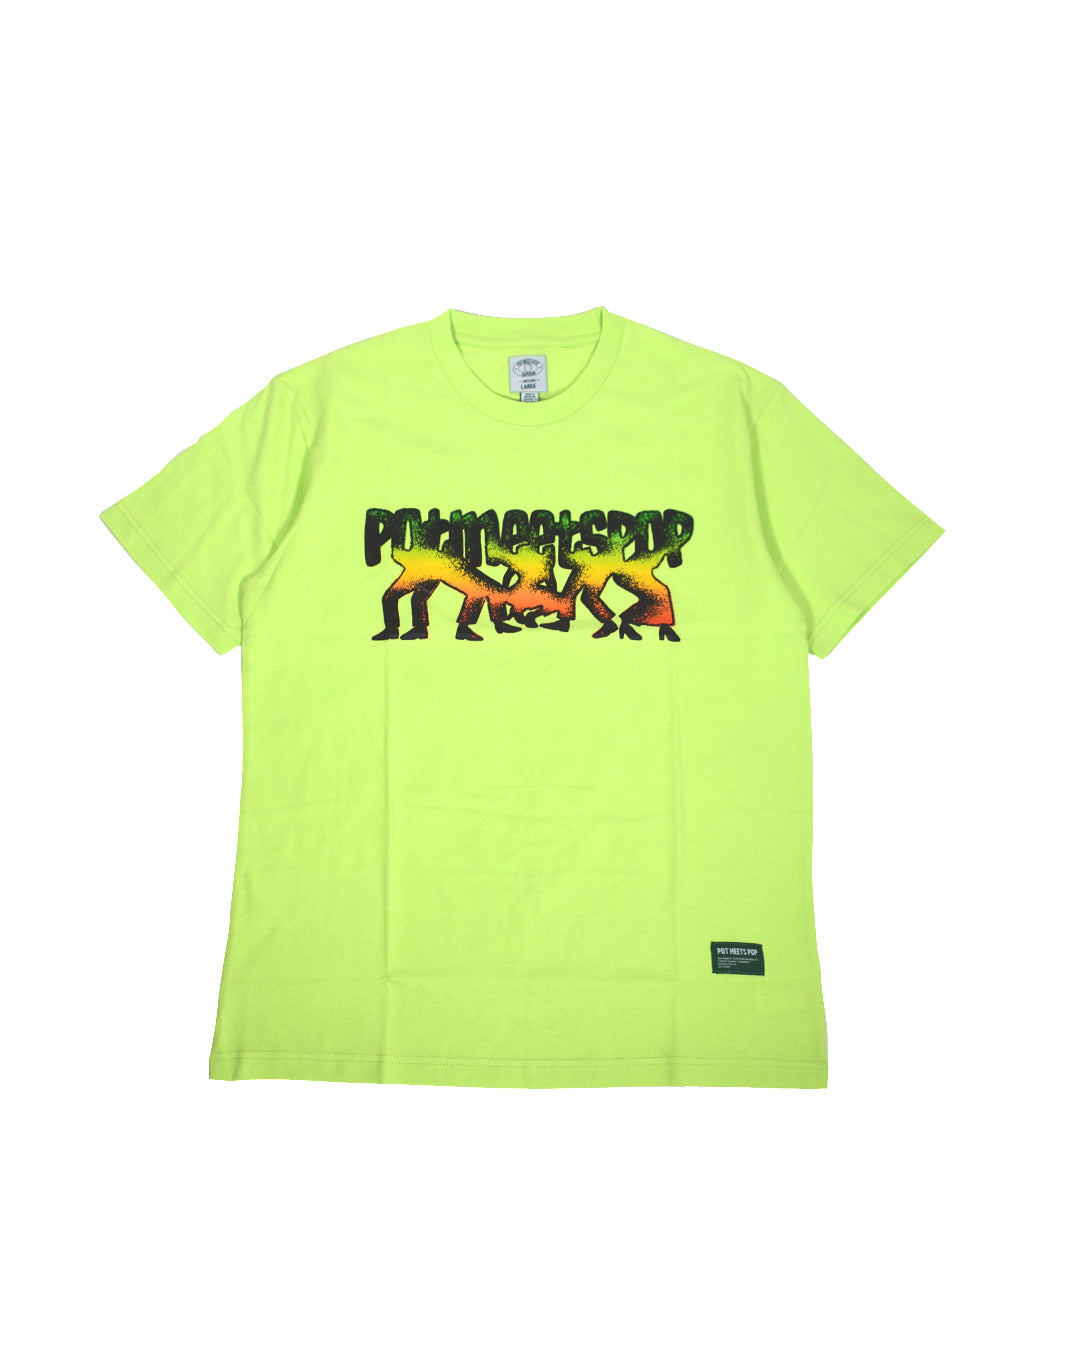 PMP MOVE YOUR FEET S/S Tee